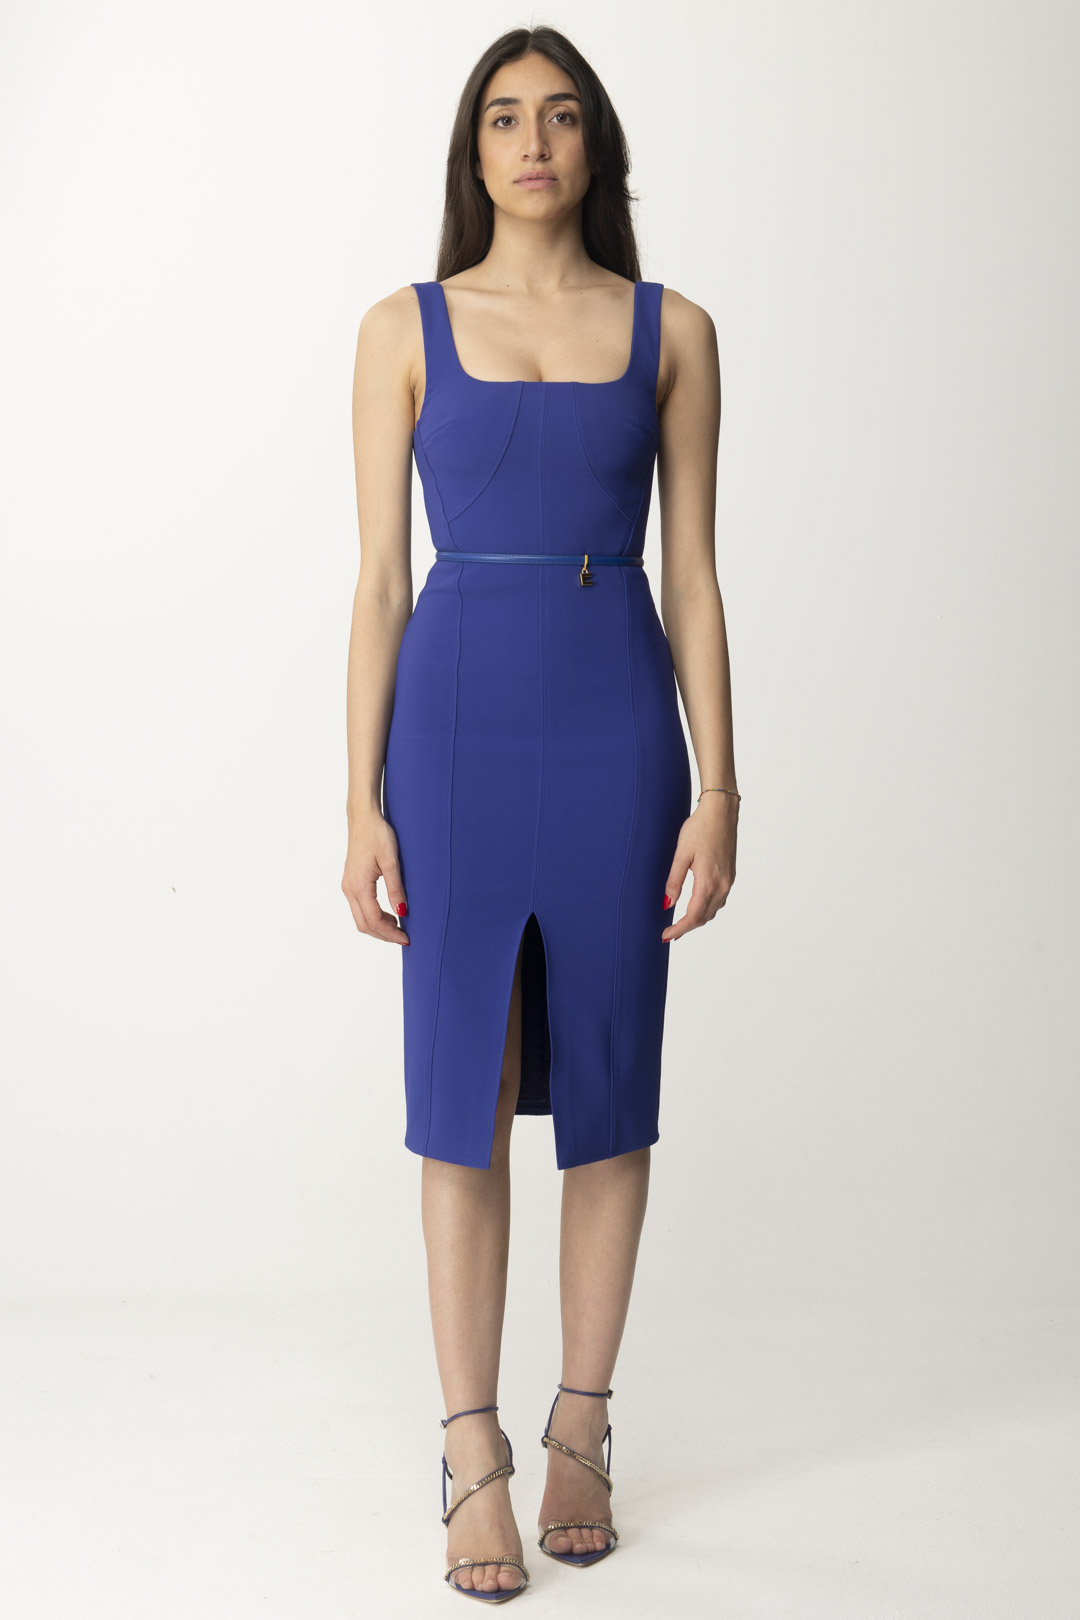 Preview: Elisabetta Franchi Sheath dress with belt and logo charm BLUE INDACO